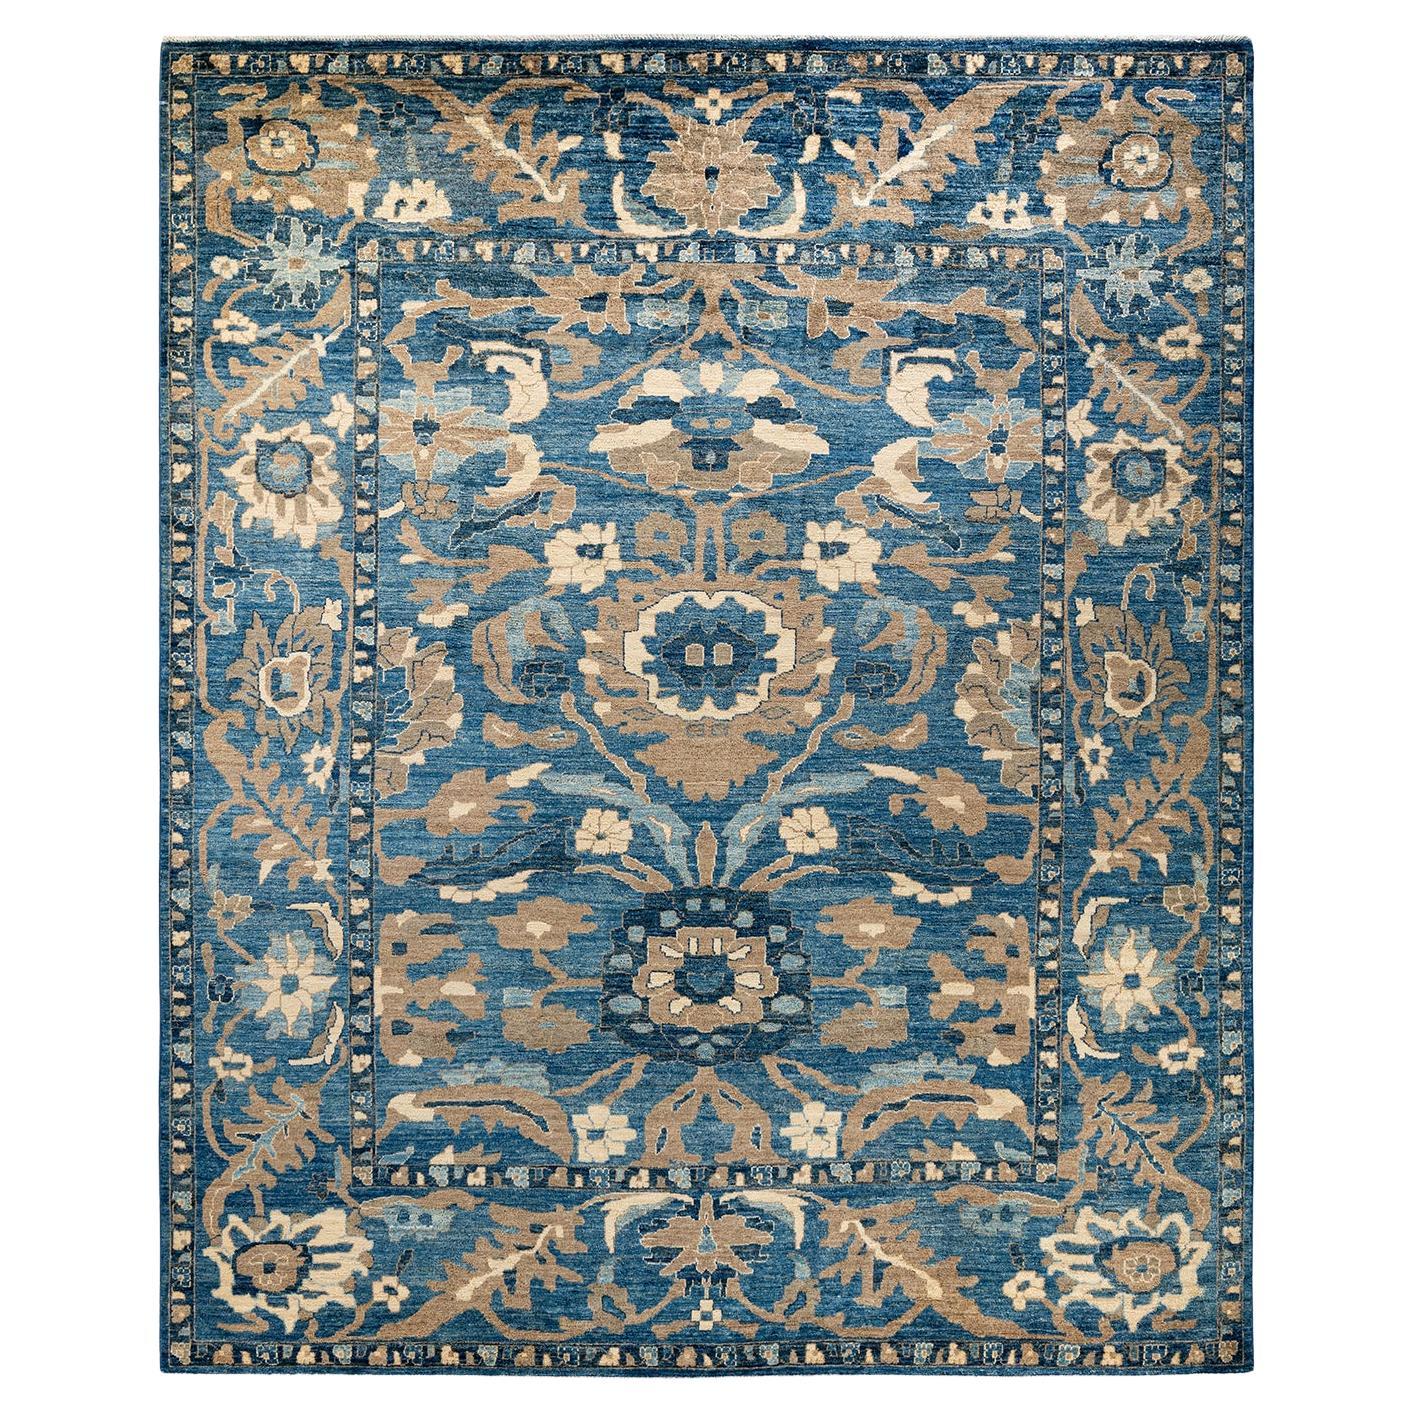 Traditional Tribal Hand Knotted Wool Light Blue Area Rug